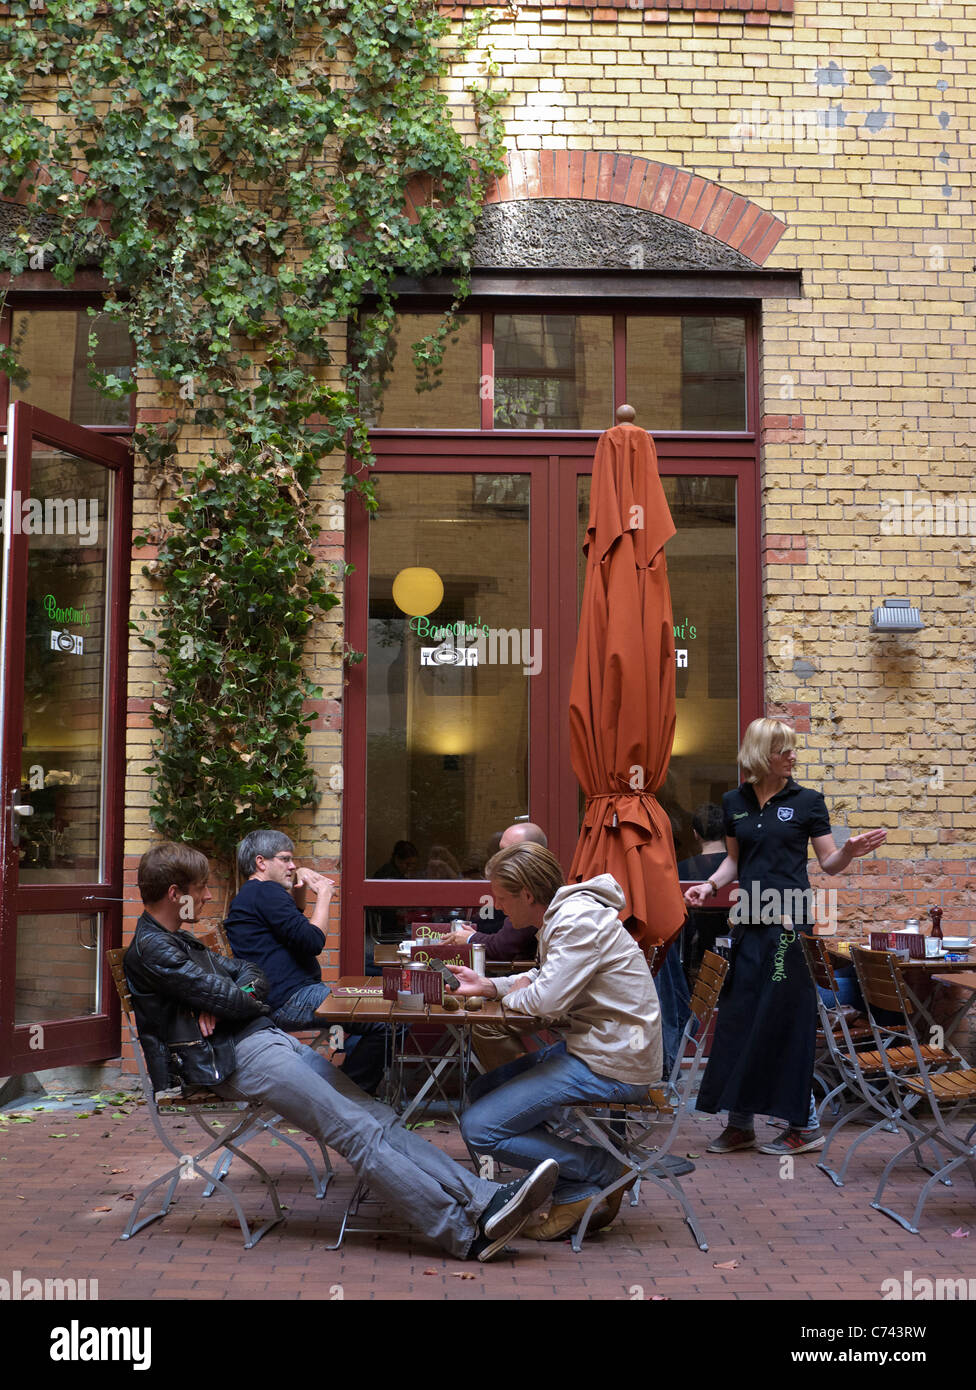 Barcomis cafe in Sophie-Gips courtyard in Mitte district of Berlin in Germany Stock Photo